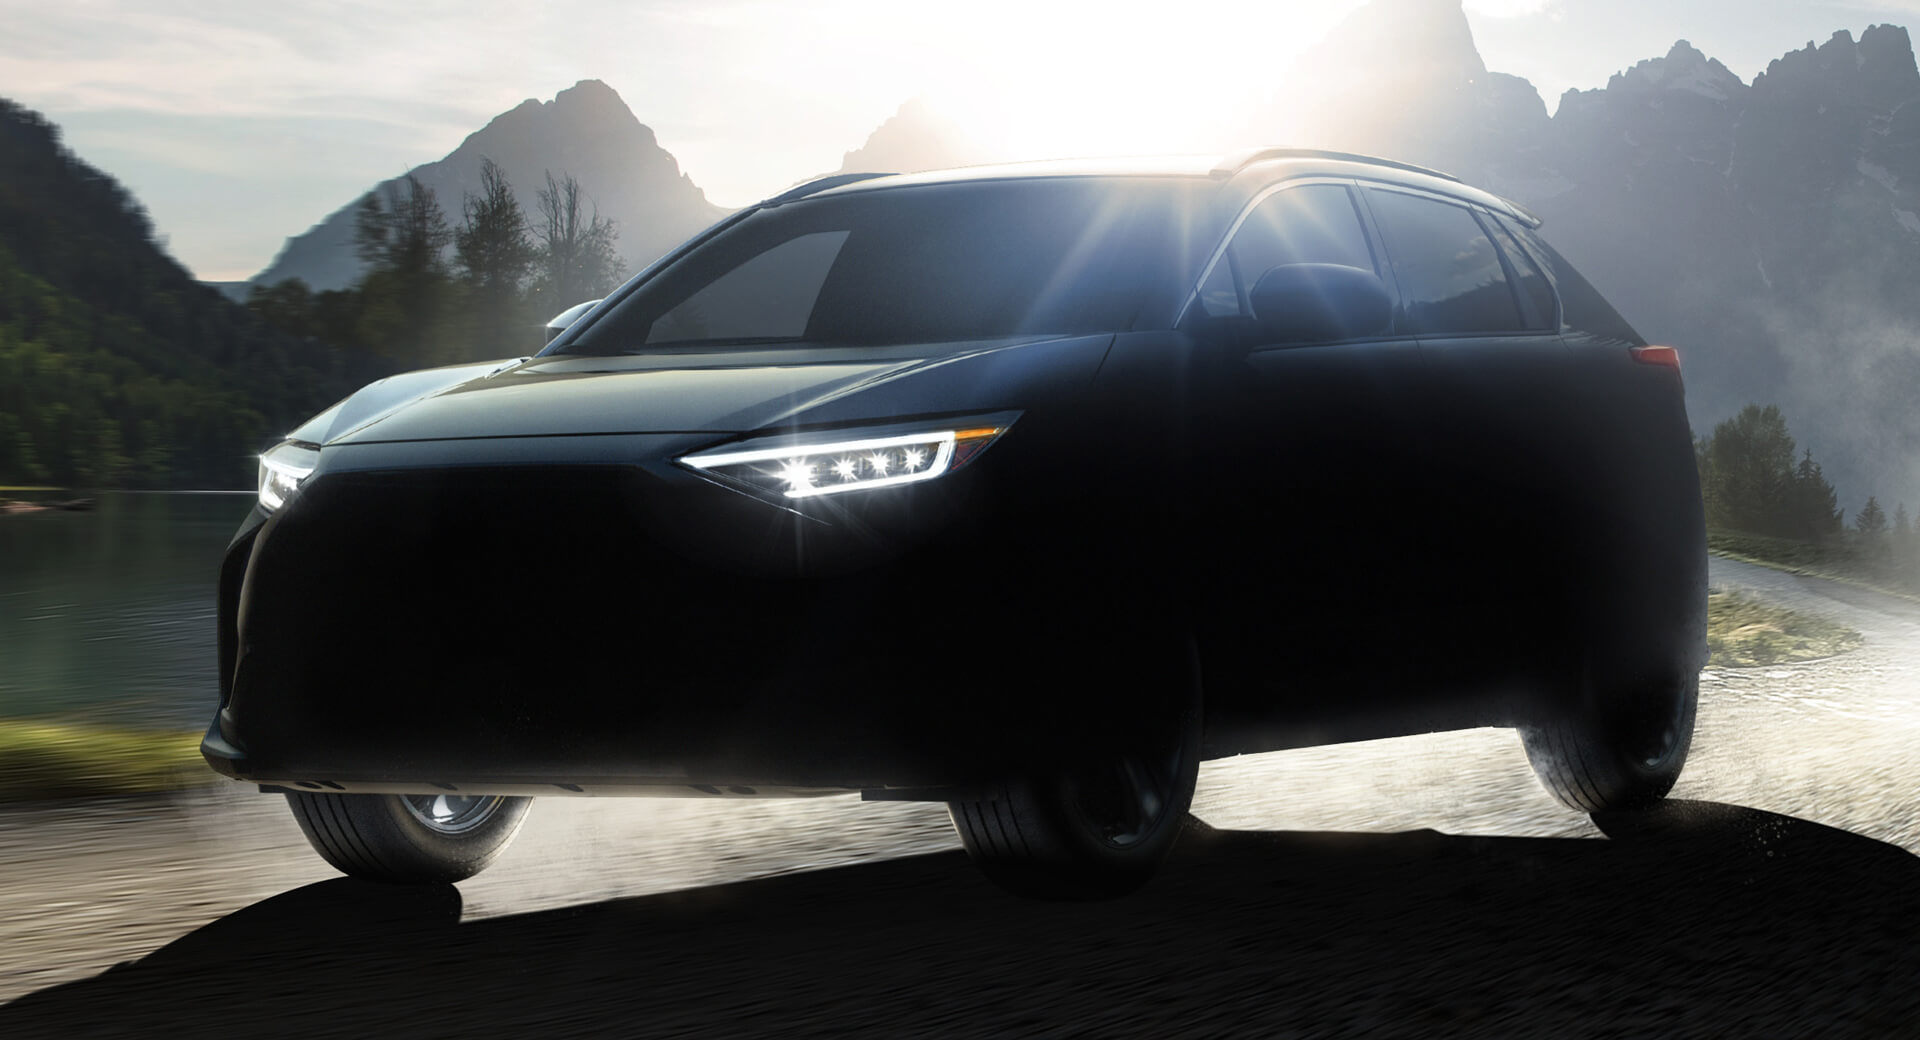 2022 Subaru Solterra Teased As New Electric SUV Co